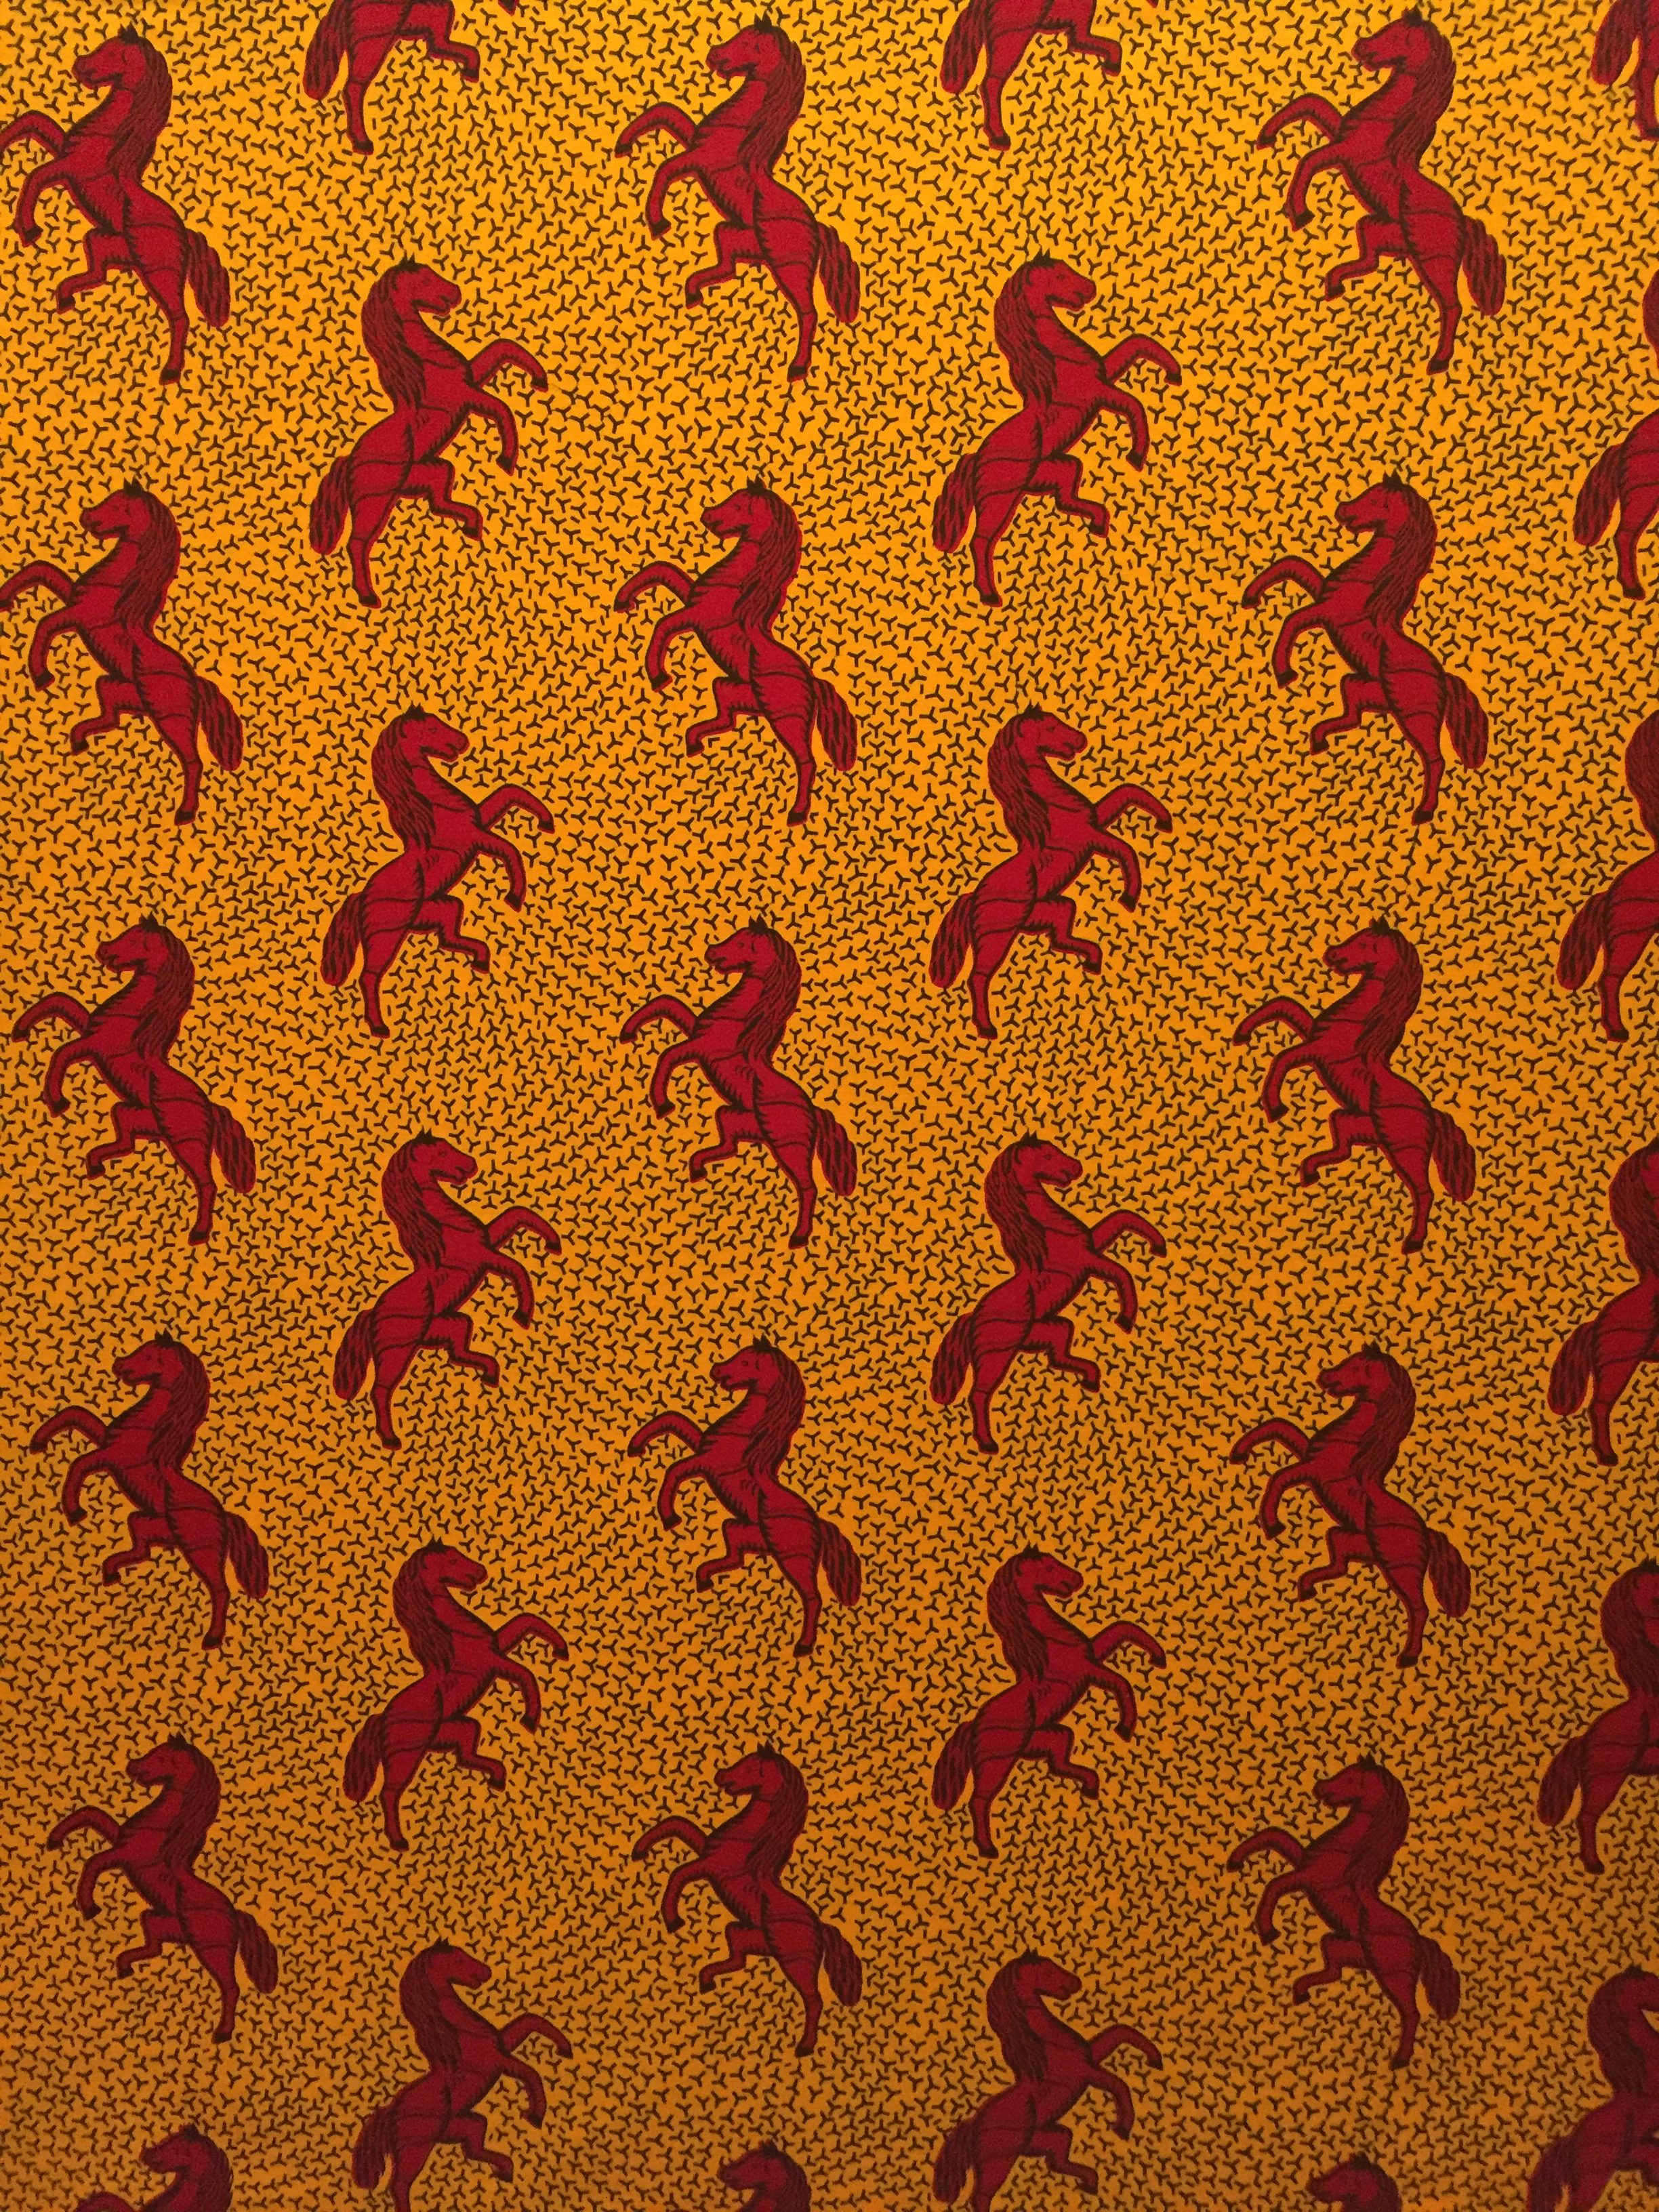 Textile. Designed by Haarlemsche Katoen Maatschappij - Haarlem Cotton Company. 1930; printed 1987. Cotton; wax block print. The names of many patterns identy with a womans family and marital relationships. In Côte d Ivoire, the classic Jumping Horse, also known as Je Cours Plus Vite Que Ma Rivale I - I Run Faster than my Rival - expresses the rivalry between co-wives. In Nigeria, Igbo women favor this design for Aso-Ebi - family cloth - to express unity at their annual womens meeting, held every August. 